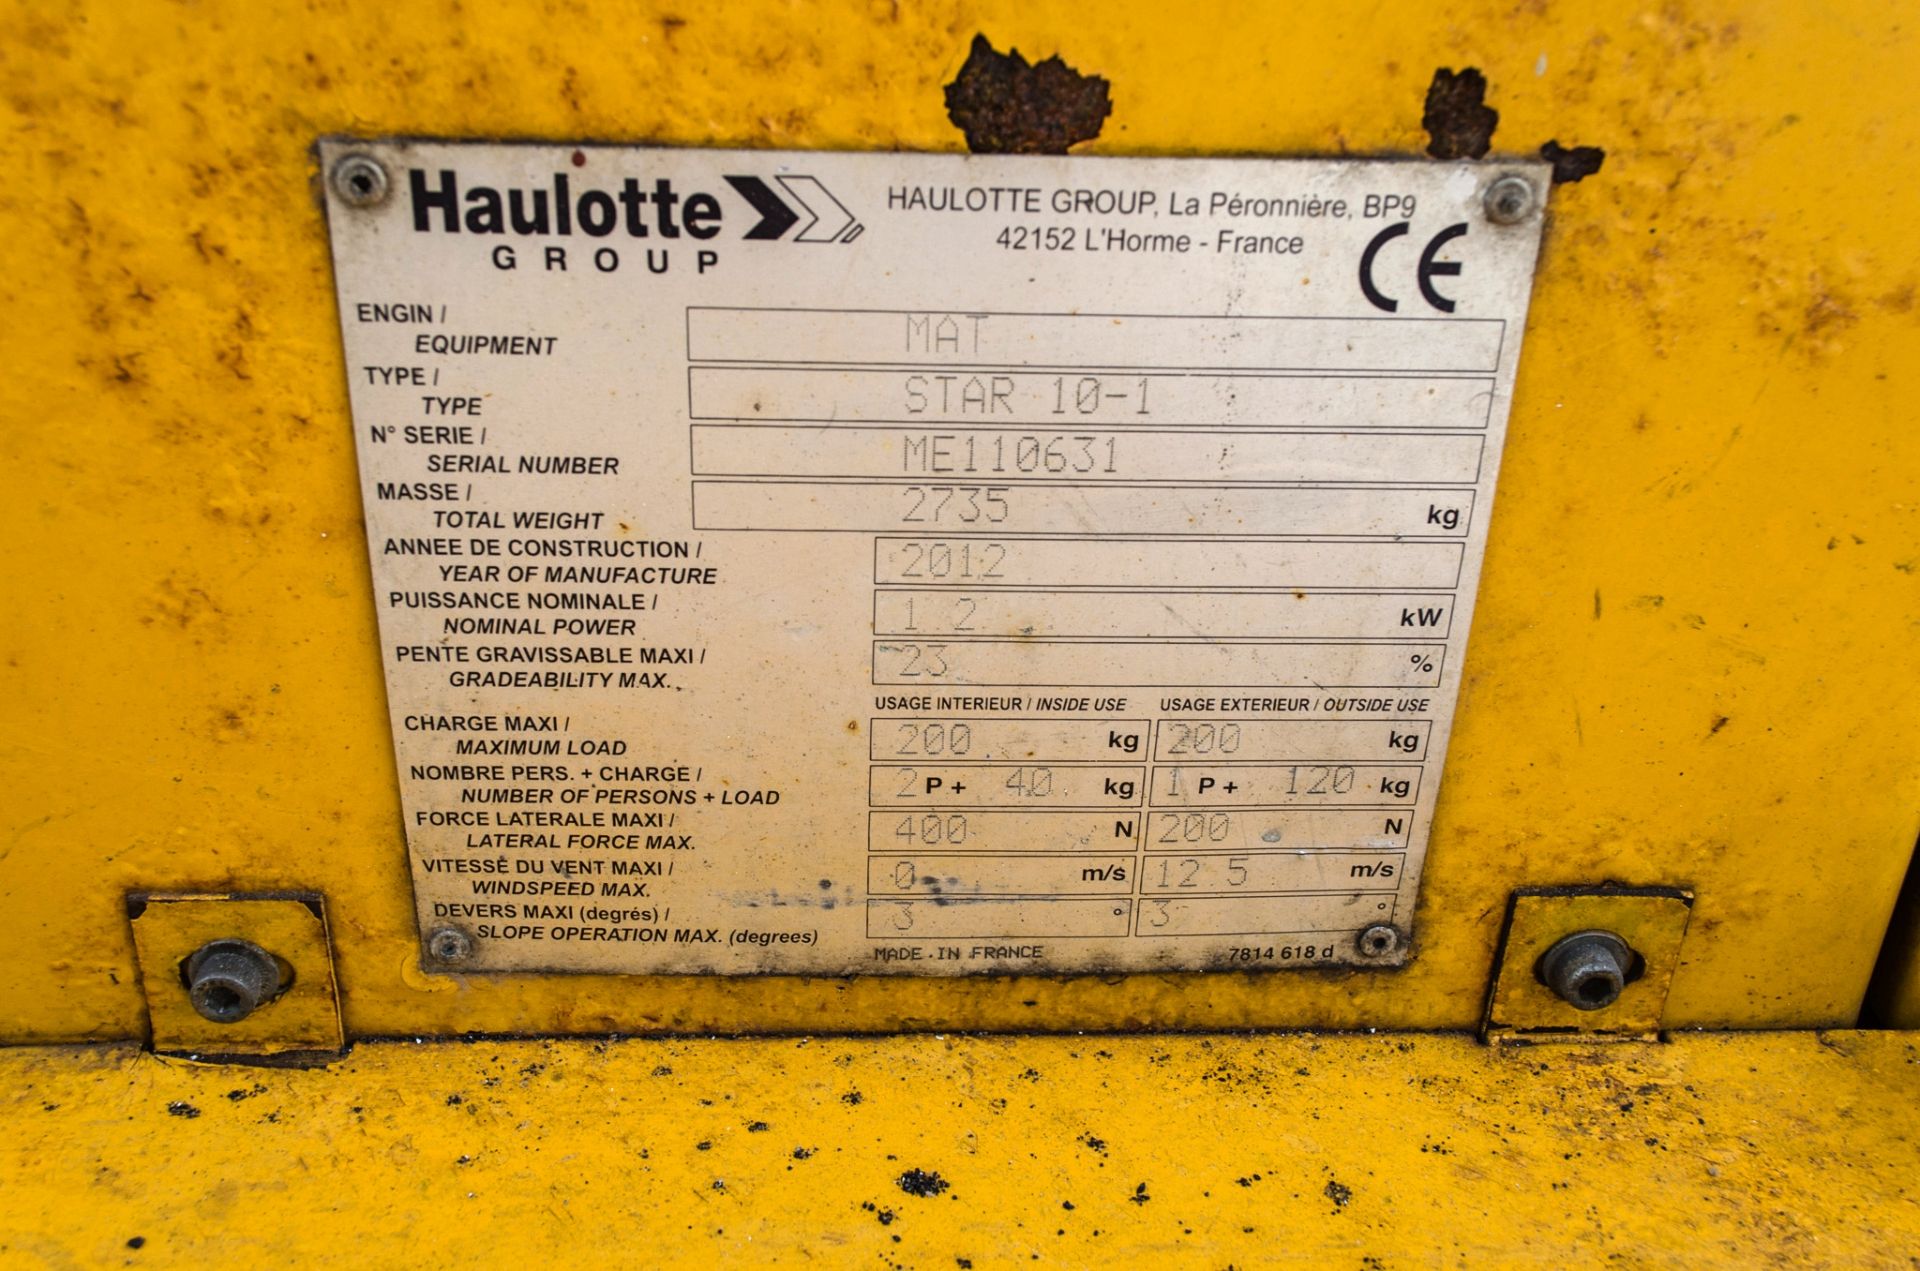 Haulotte Star 10-1 battery electric vertical mast access platform Year: 2012 S/N: ME110631 - Image 9 of 9